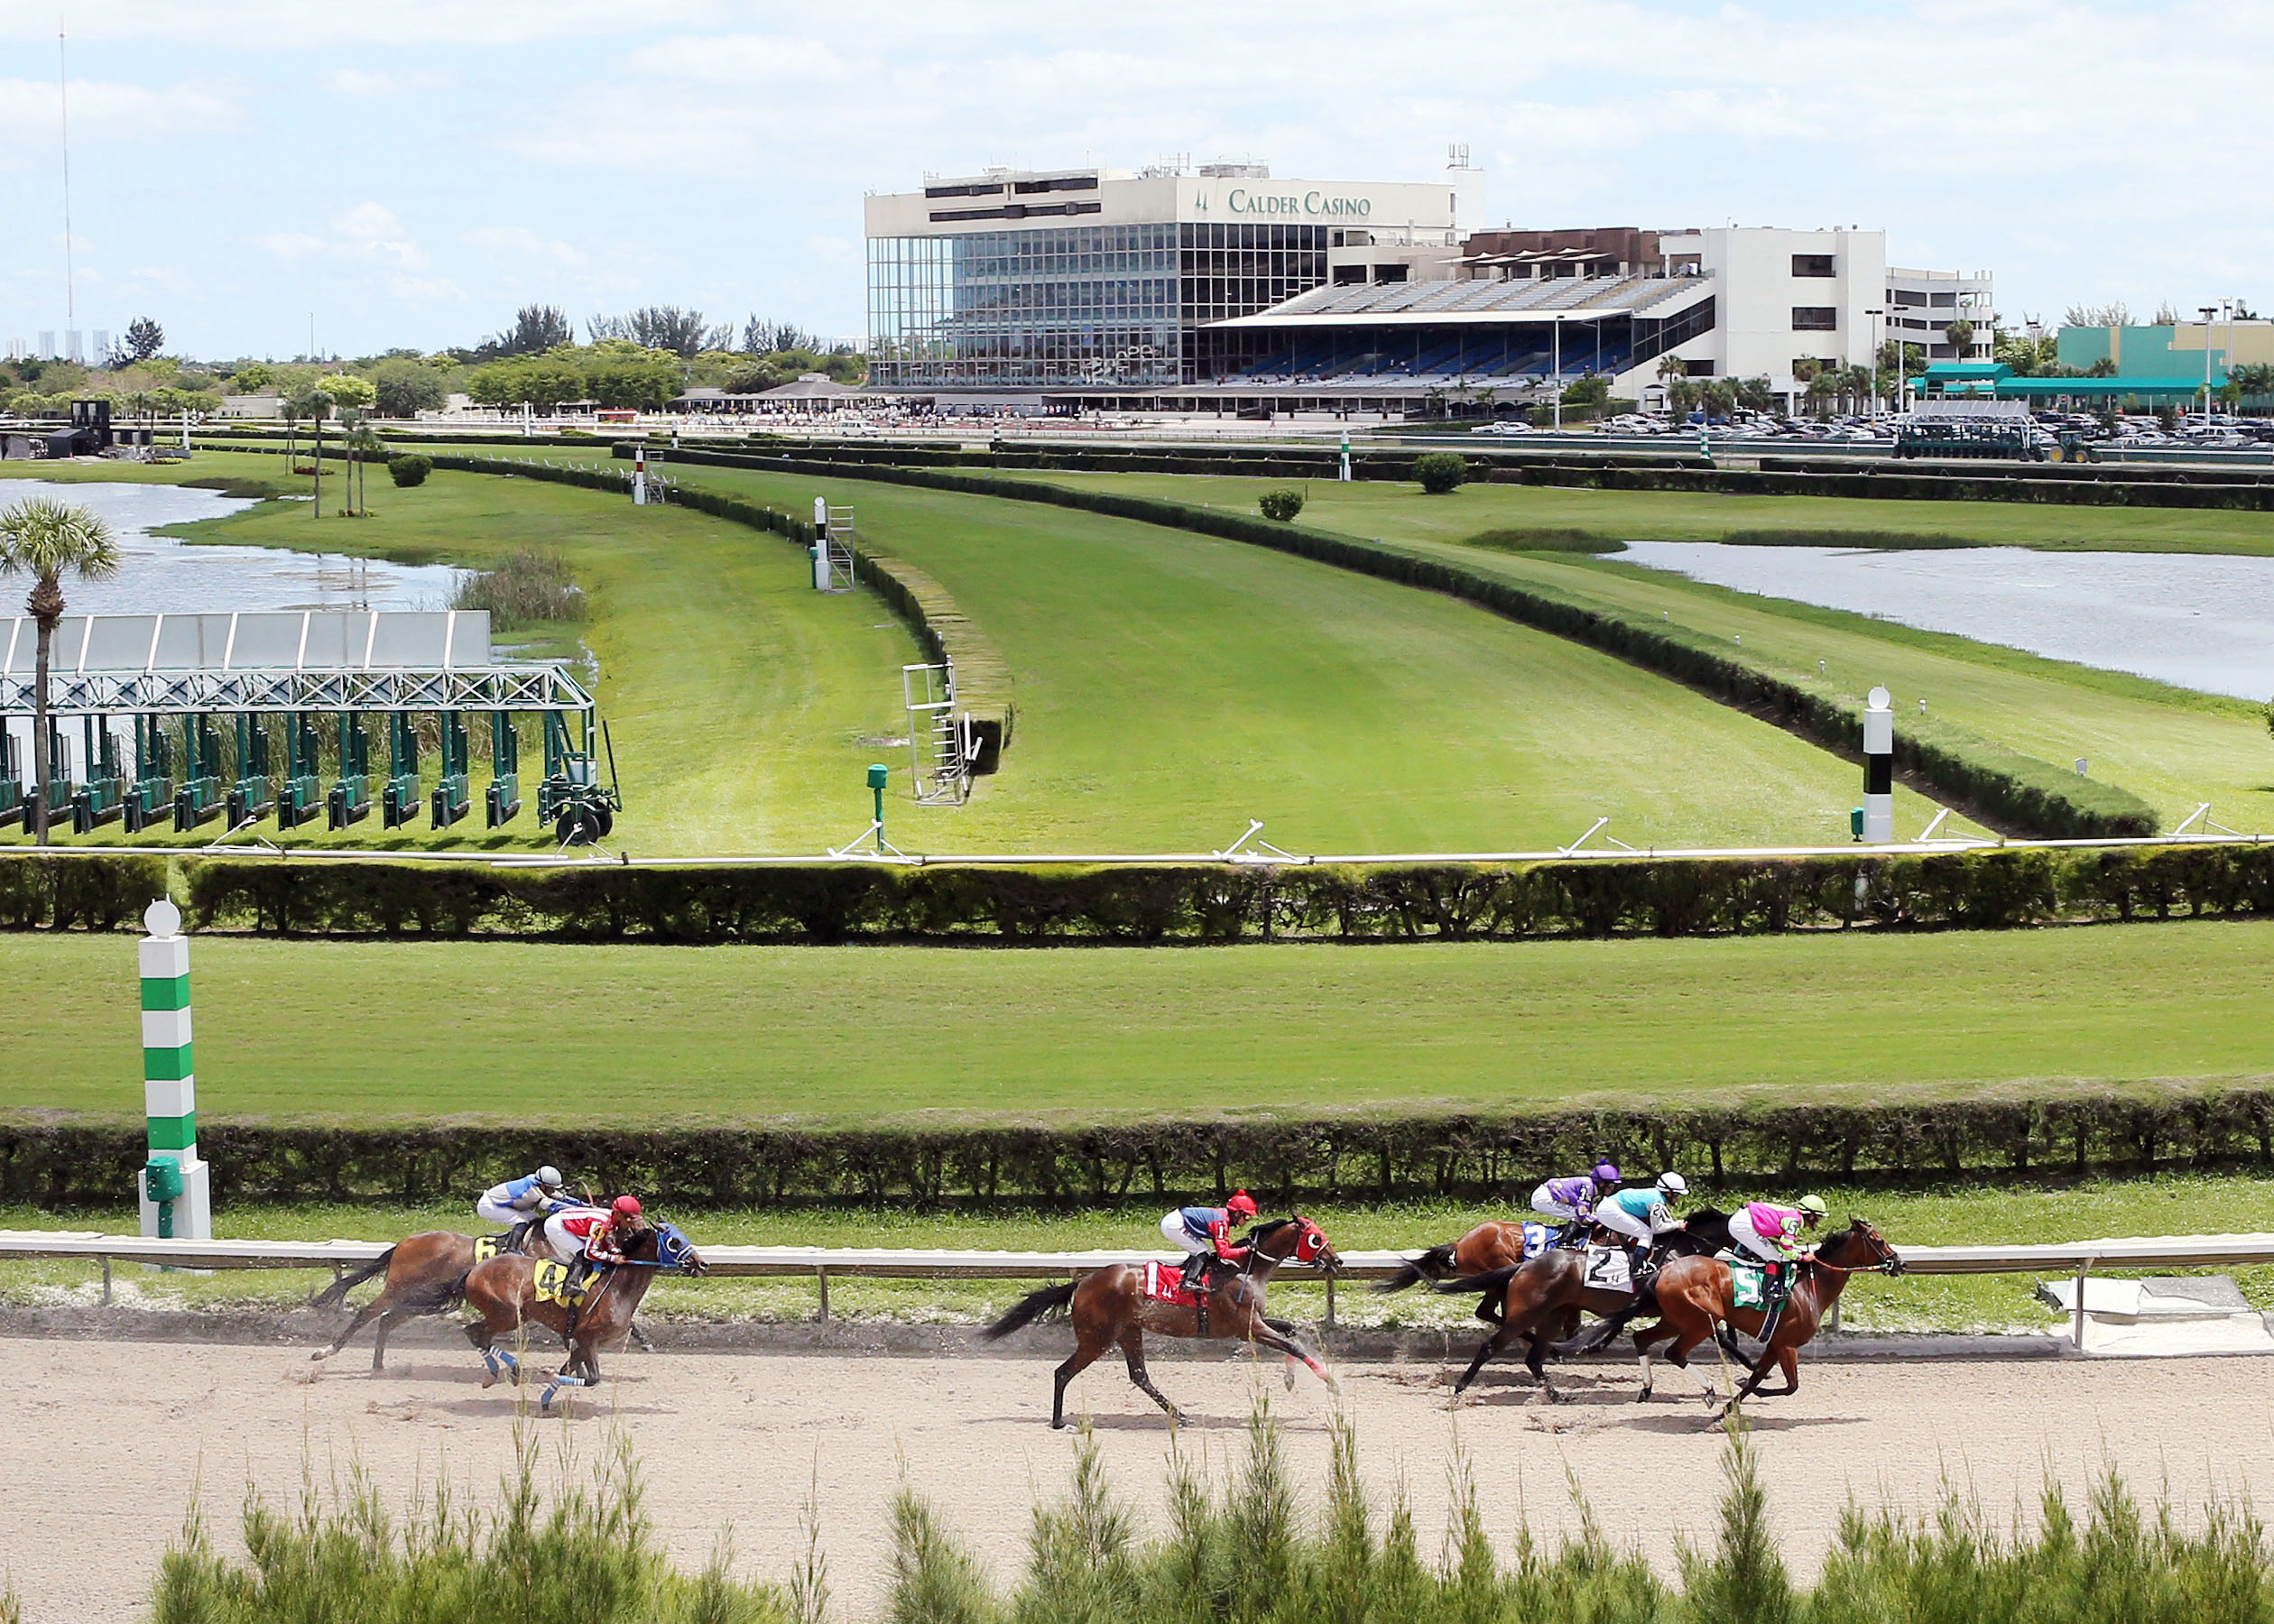 Gulfstream Park horse racing track in Florida